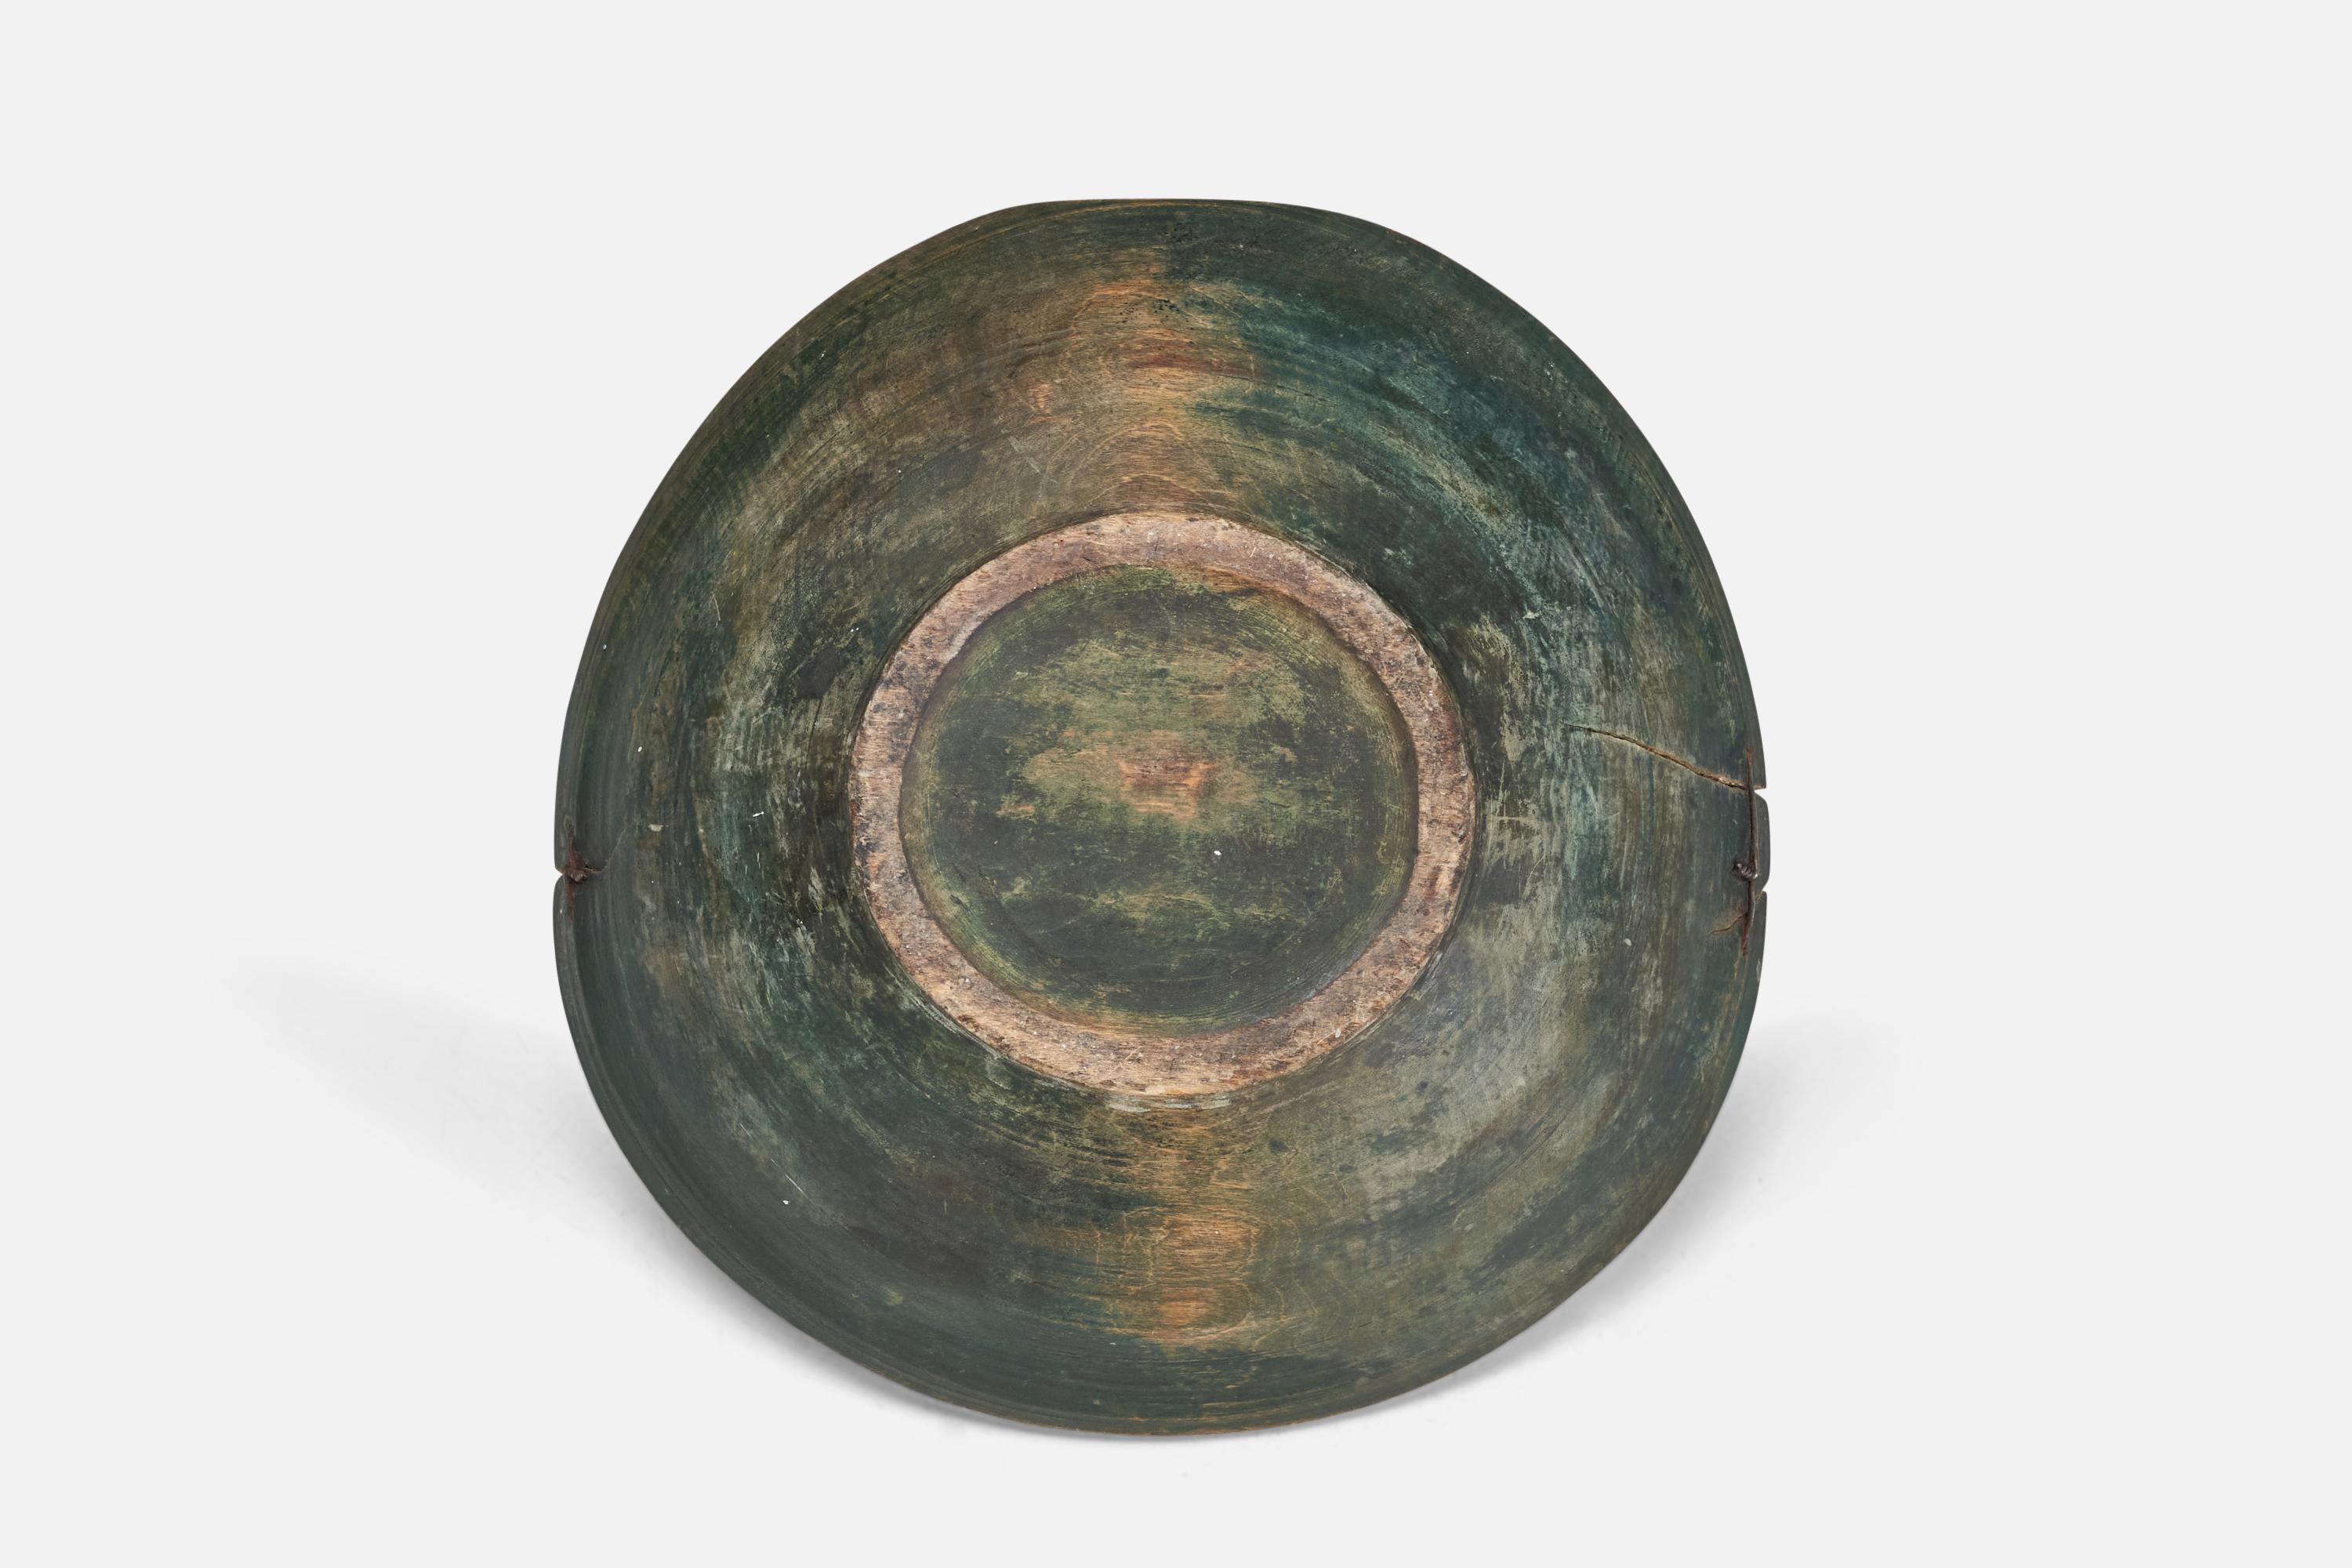 Swedish Craft, Unique Large Organic Bowl, Green Painted Wood Metal, 18th Century For Sale 1